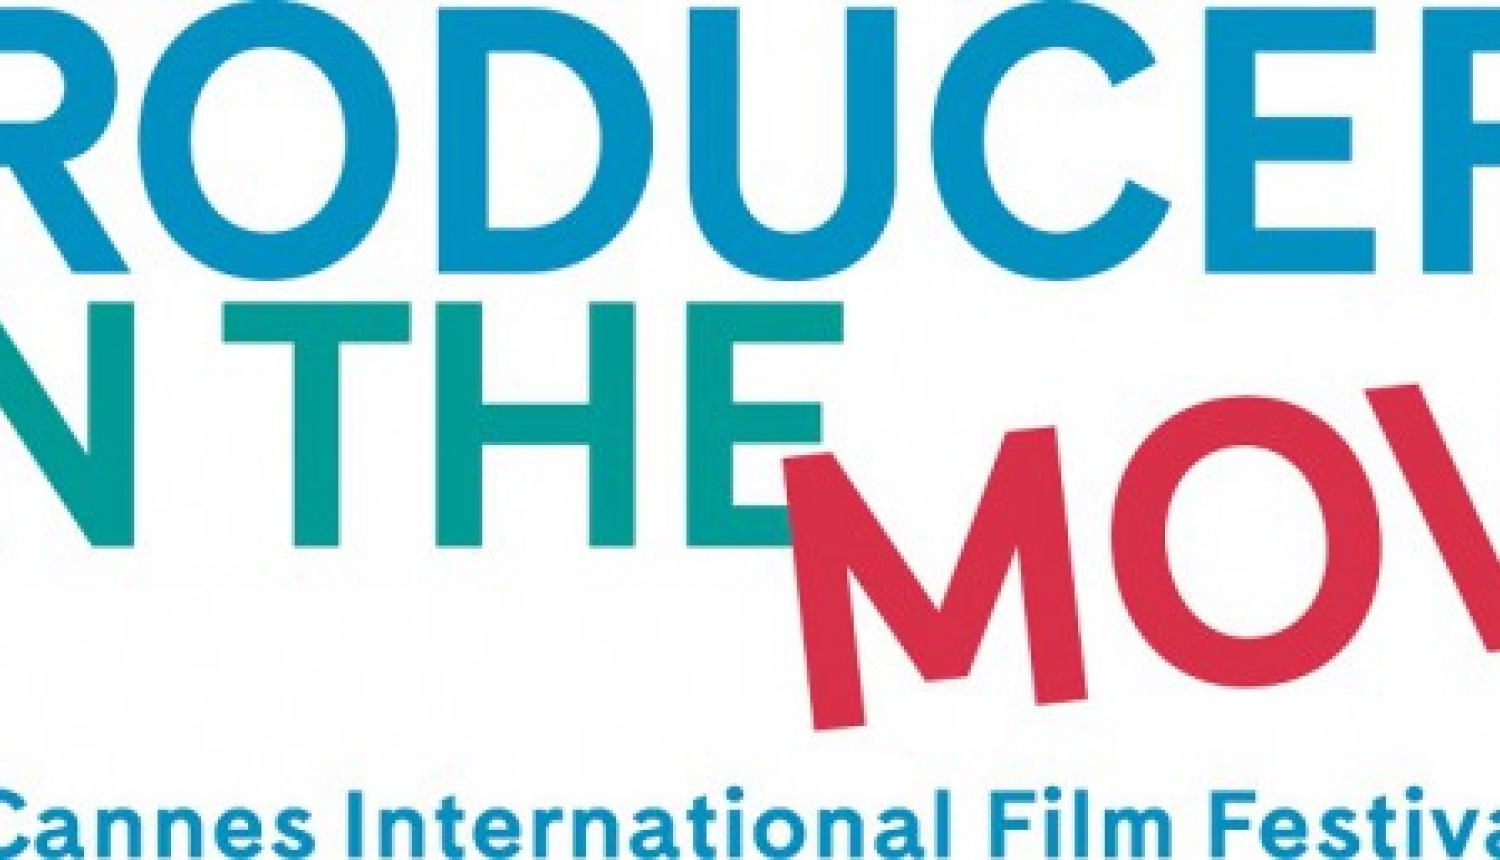 Gints Grūbe to participate at the EFP’s “Producers on the Move” in Cannes